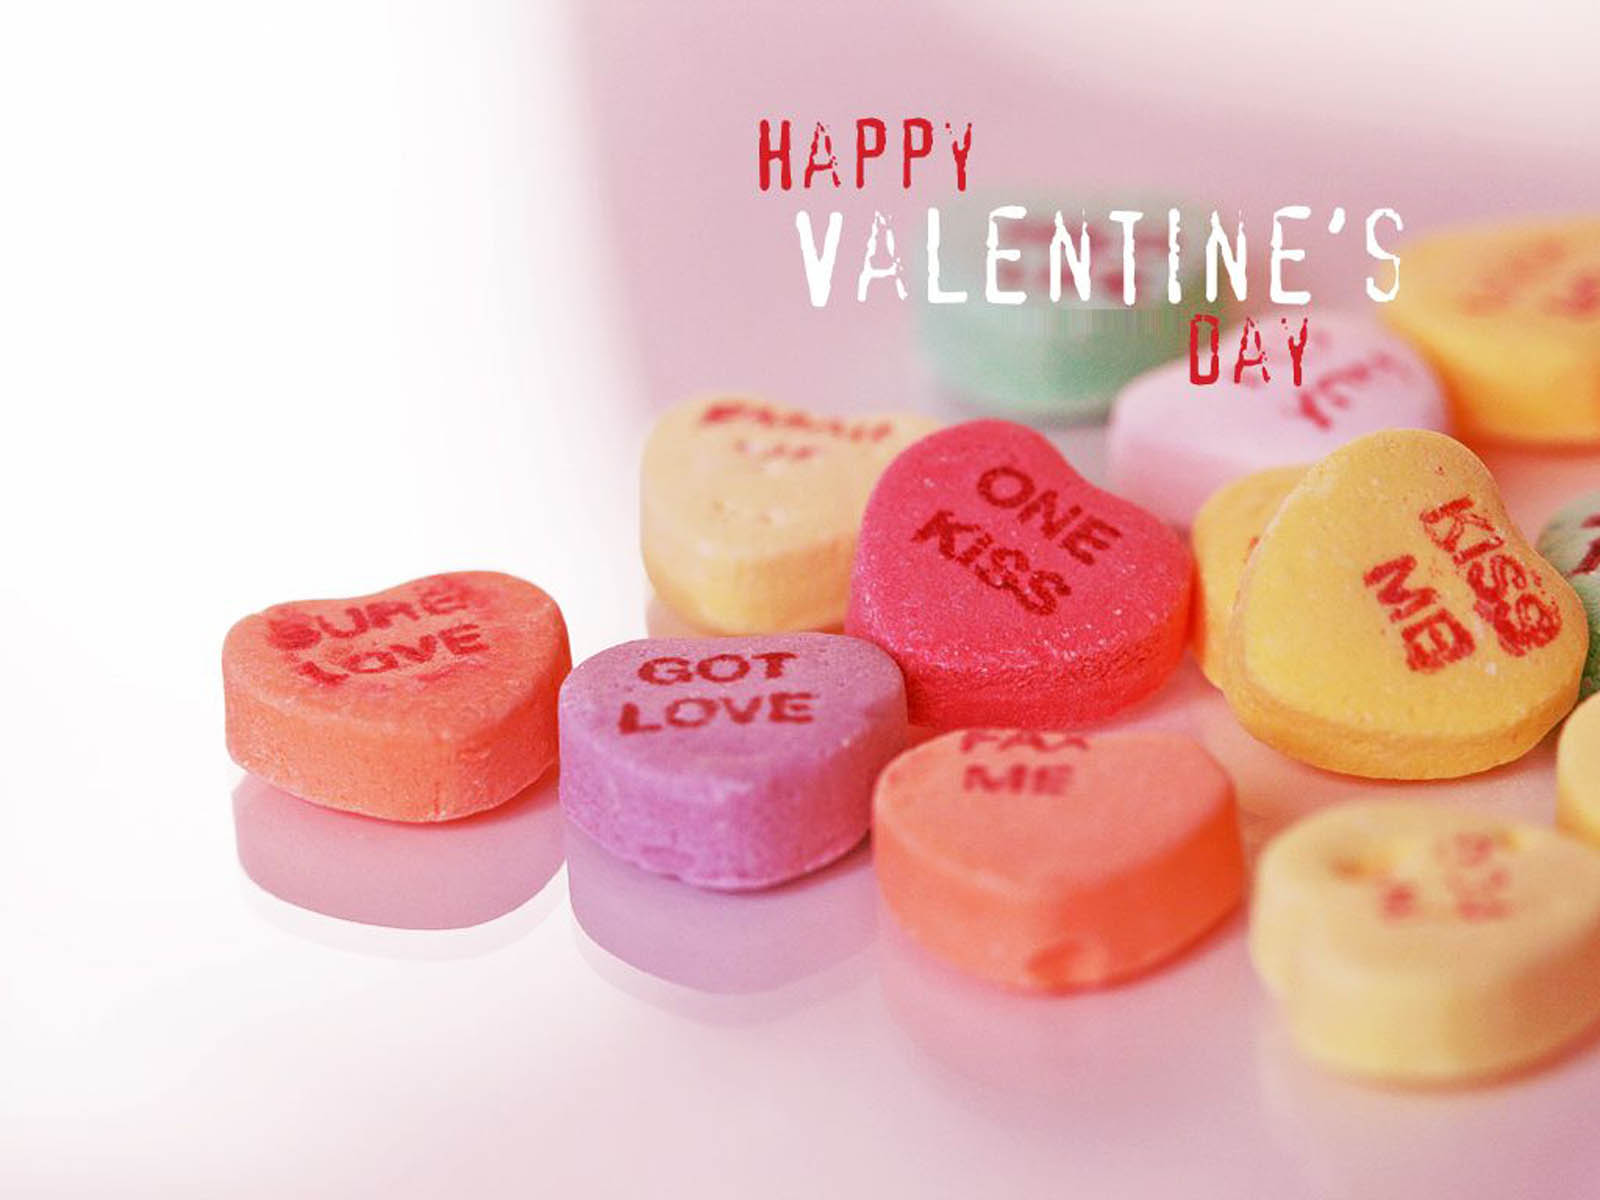 Tag Valentines Day Desktop Wallpaper Background Photos Image And